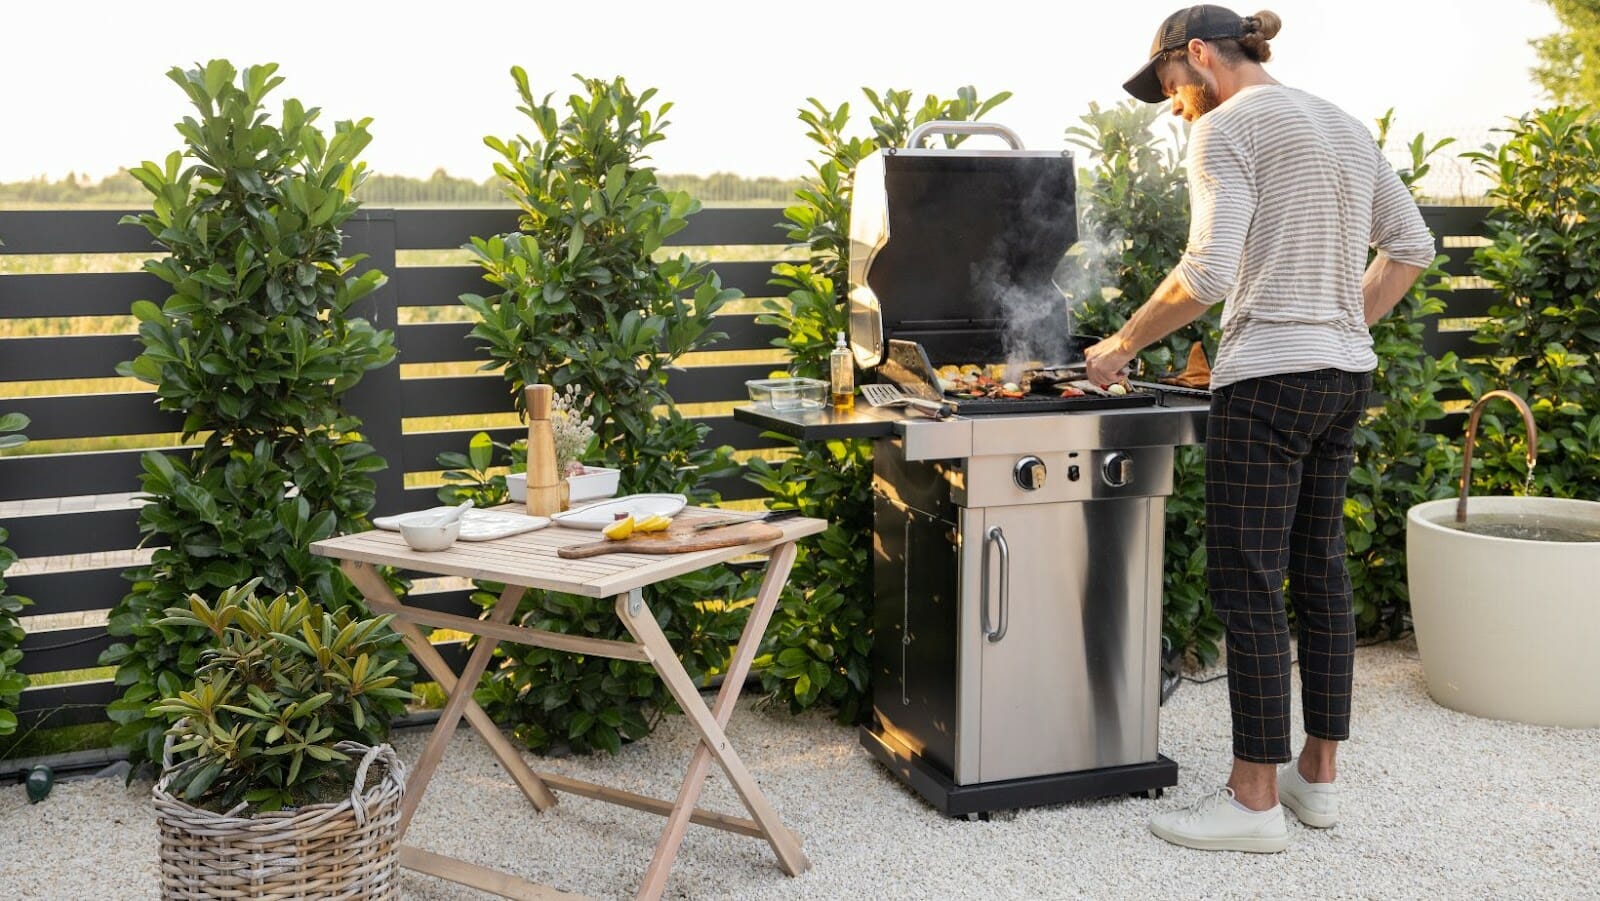 Outdoor Grills: DO’S AND DON’TS